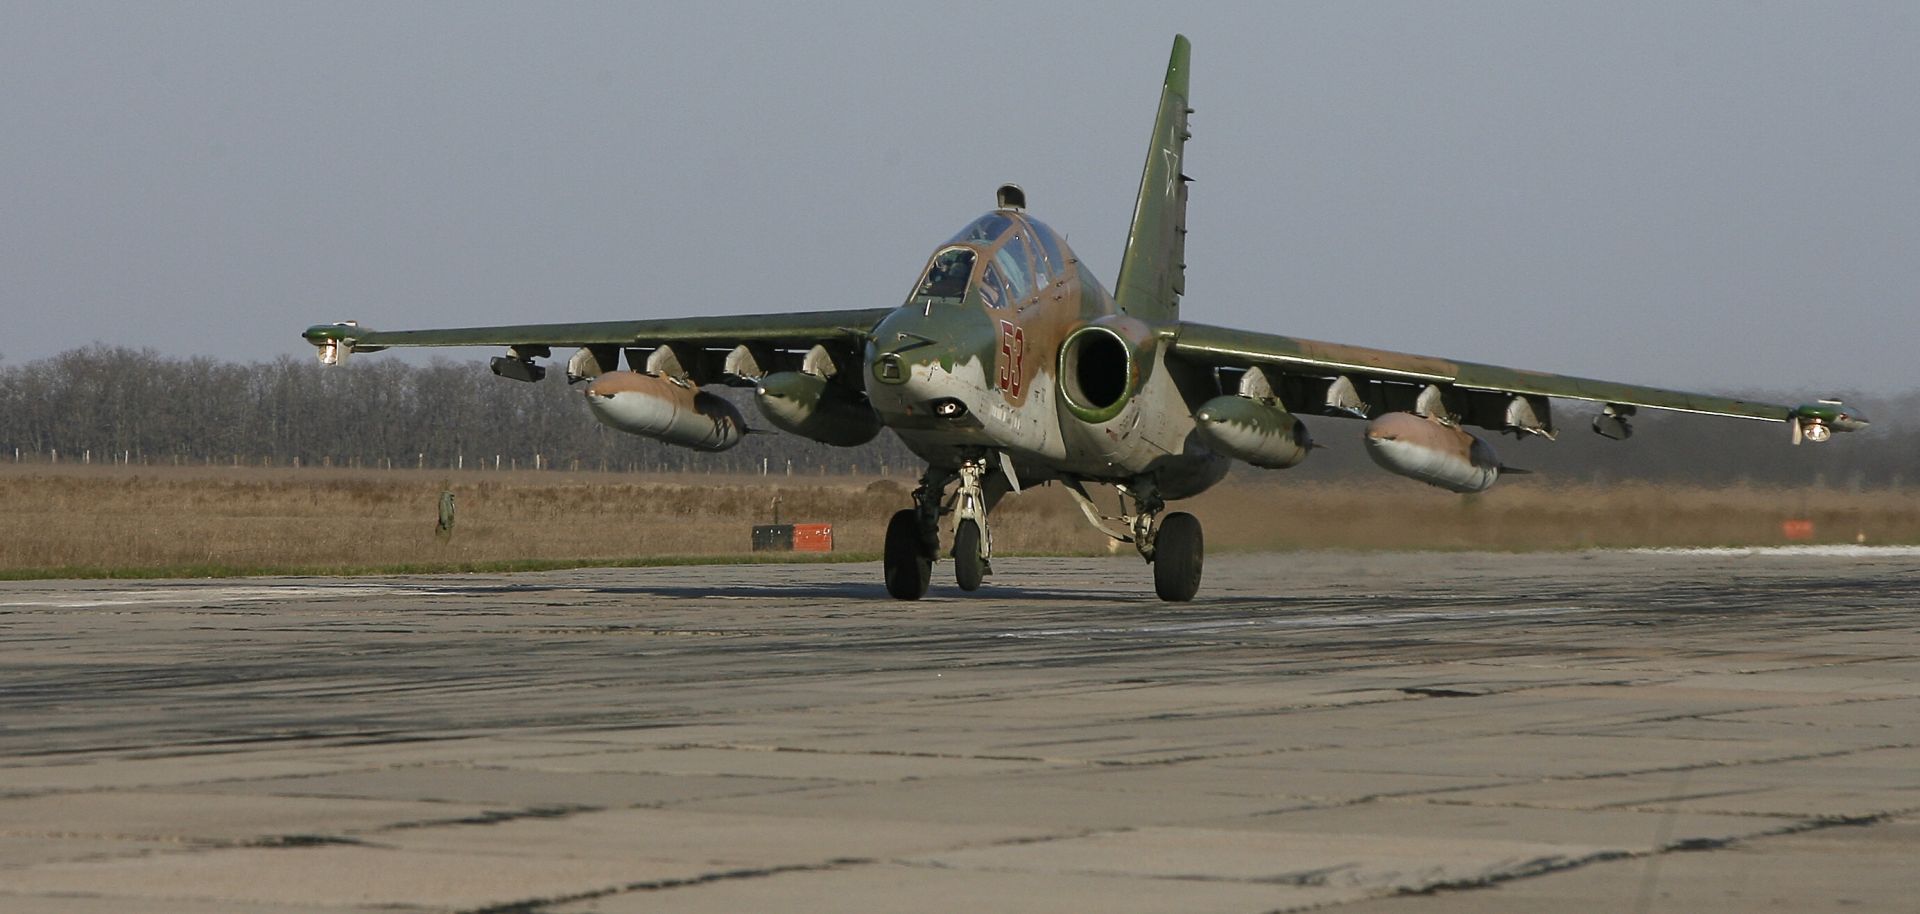 A Russian Su-25 ground attack aircraft lands at an airbase in Russia's Krasnodar region as part of Russia's withdrawal of armed forces from Syria.